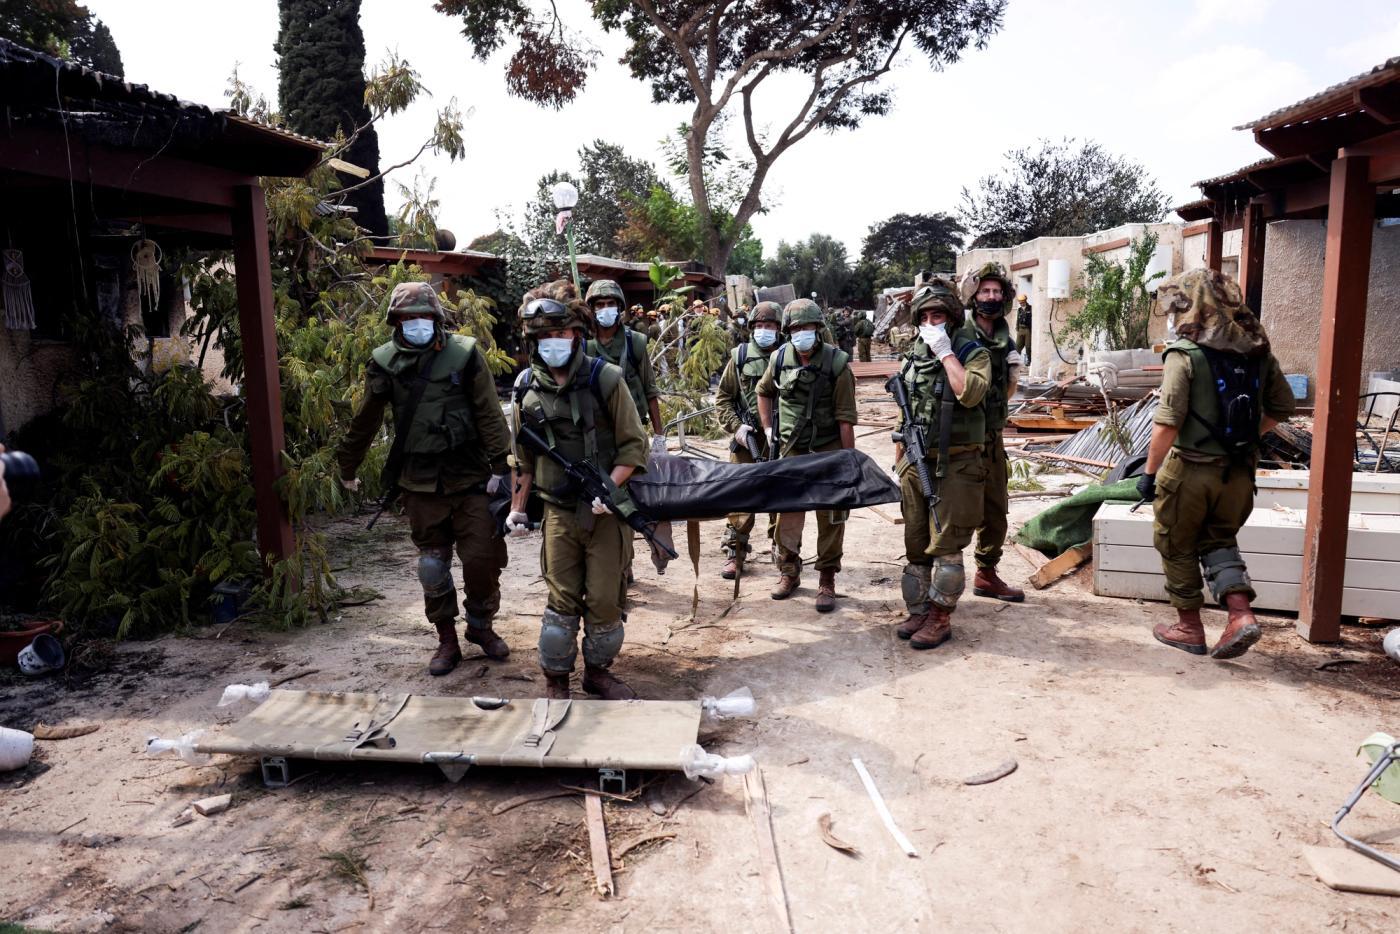 Israeli Soldiers Carry Out Body of Dead Person in Kibbutz Kfar Aza: Unconfirmed Reports of Dozens of Dead Babies and Children